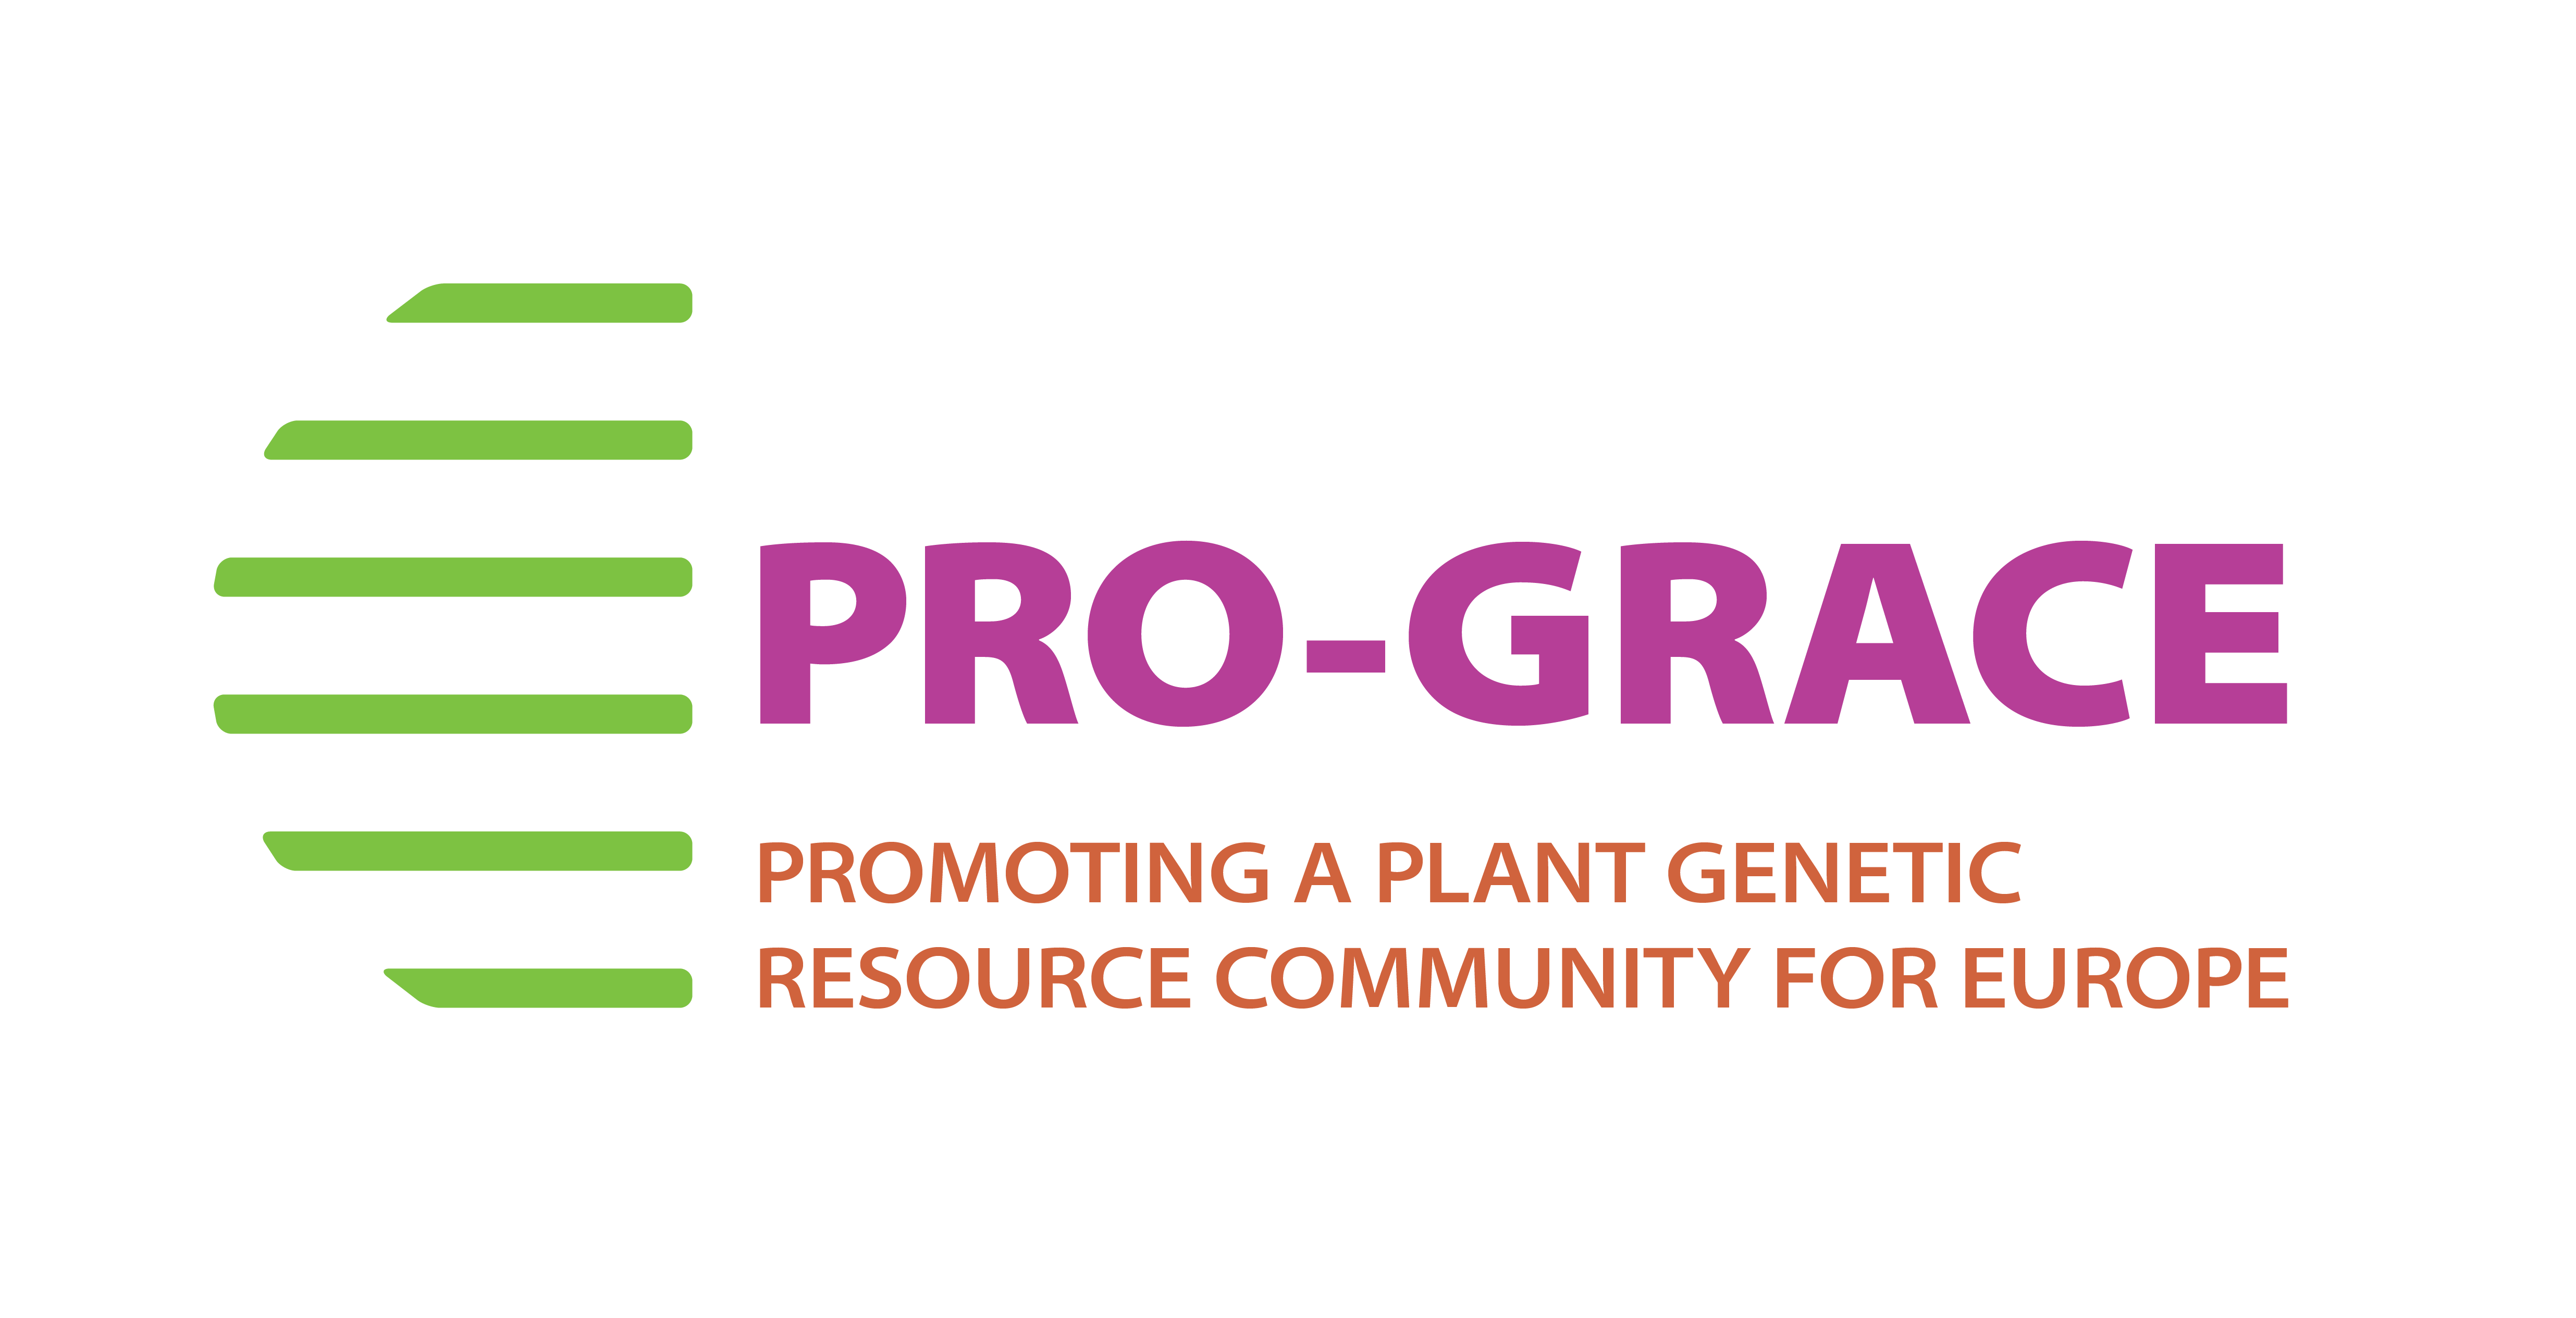 PRO-GRACE: Promoting a Plant Genetic Resources Community for Europe